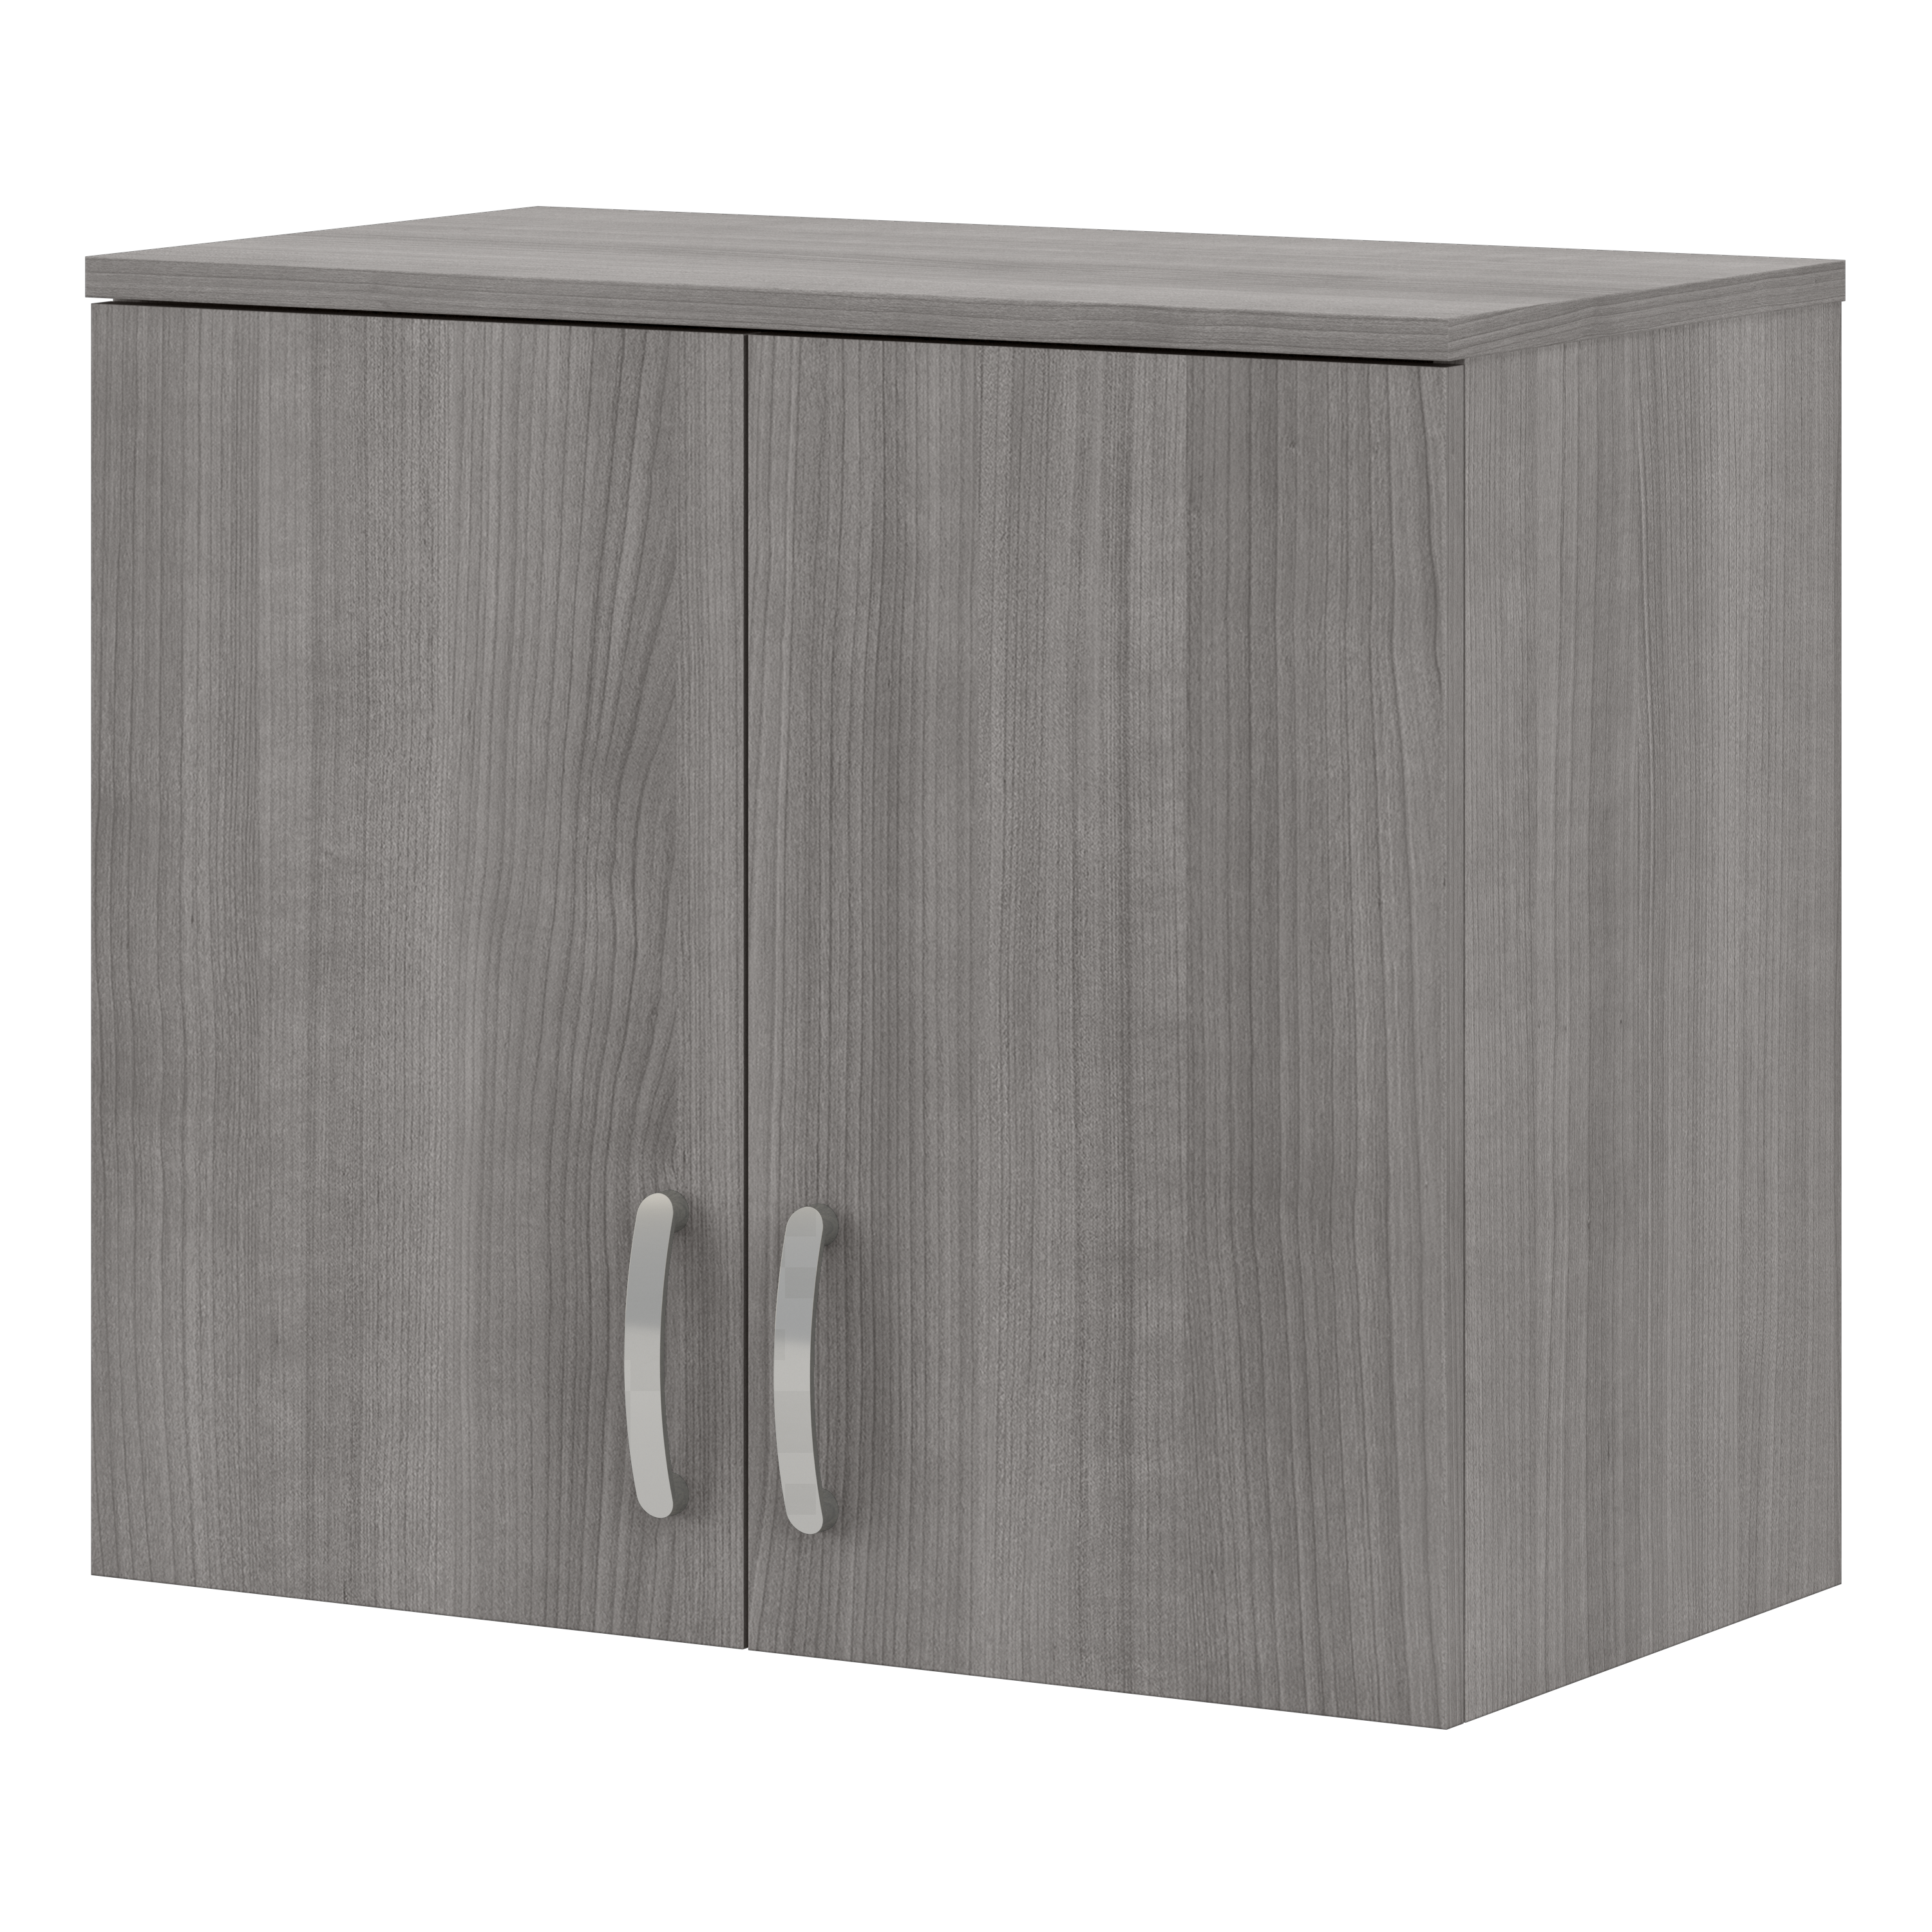 Shop Bush Business Furniture Universal Closet Wall Cabinet with Doors and Shelves 02 CLS428PG-Z #color_platinum gray